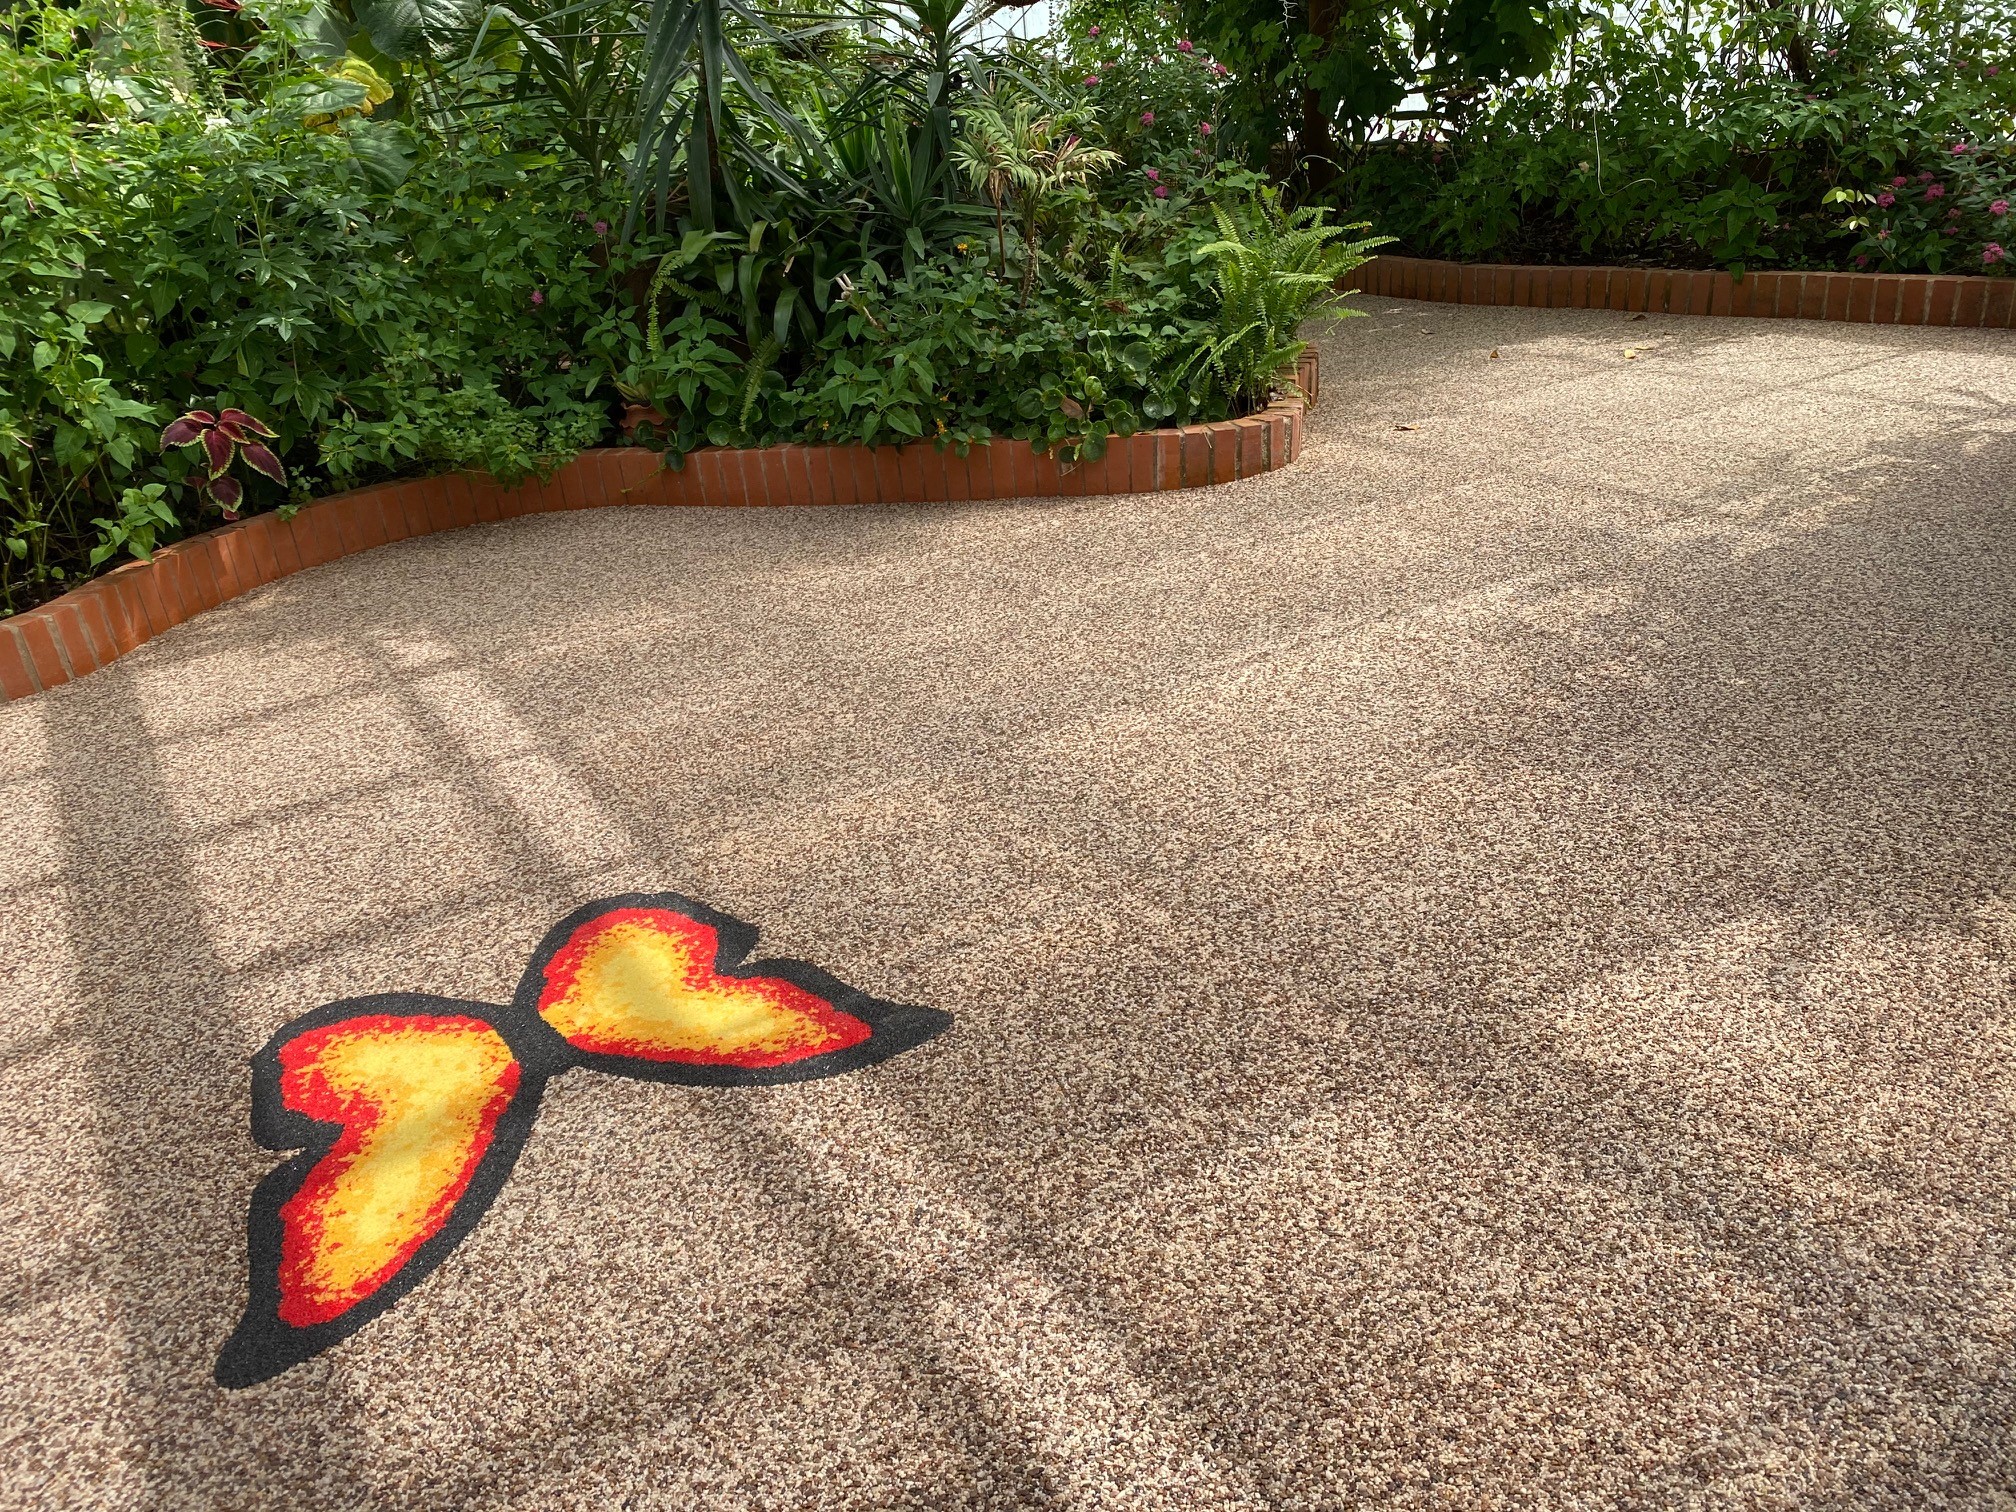 Get the WOW factor with Colourful Paving Design @SureSetUK